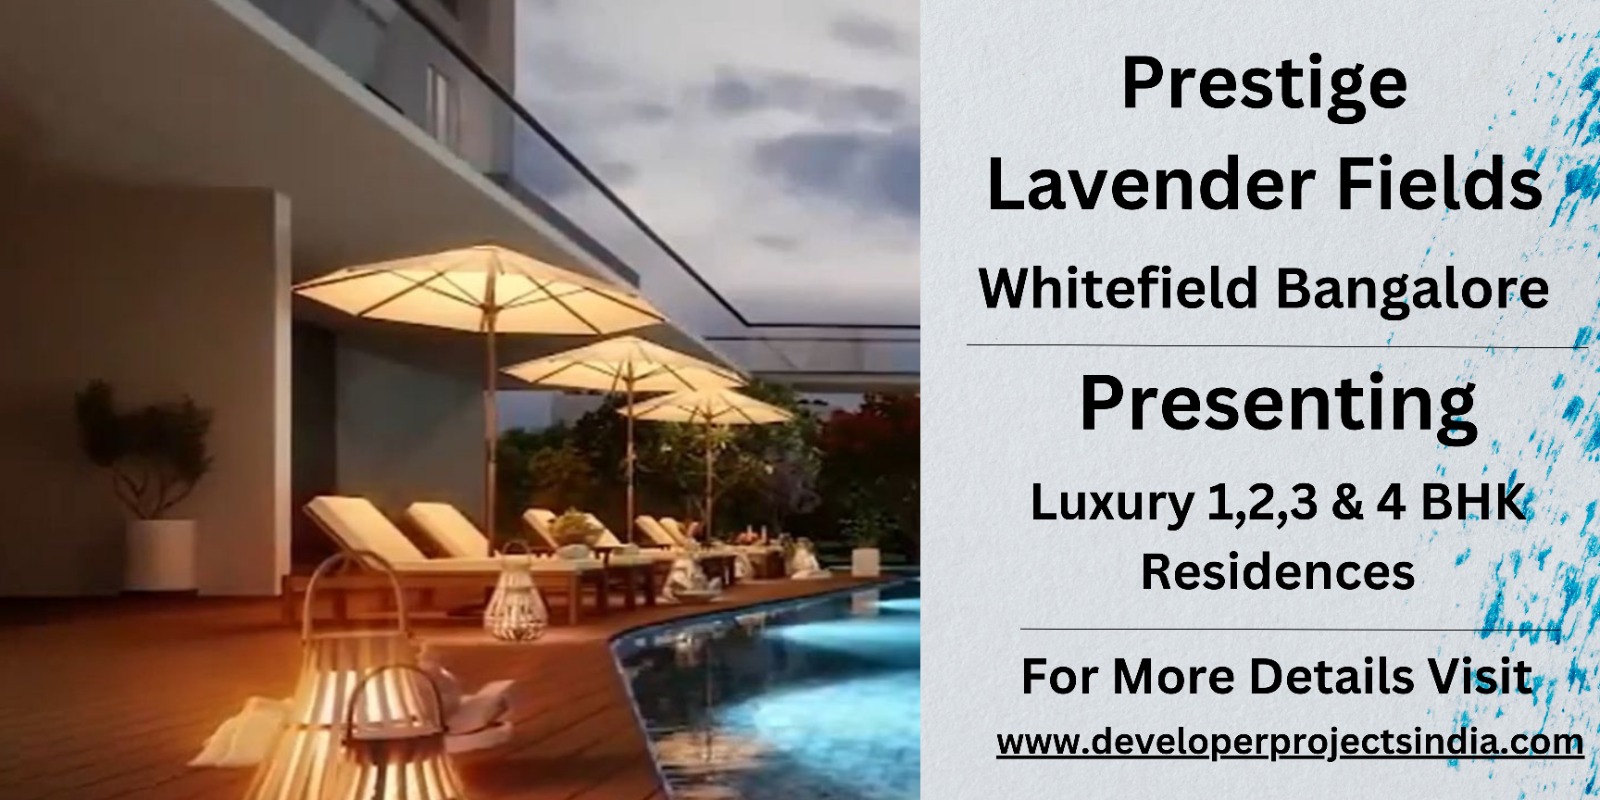 Prestige Lavender Fields: Where Luxury Residences Blossom in Whitefield, Bangalore